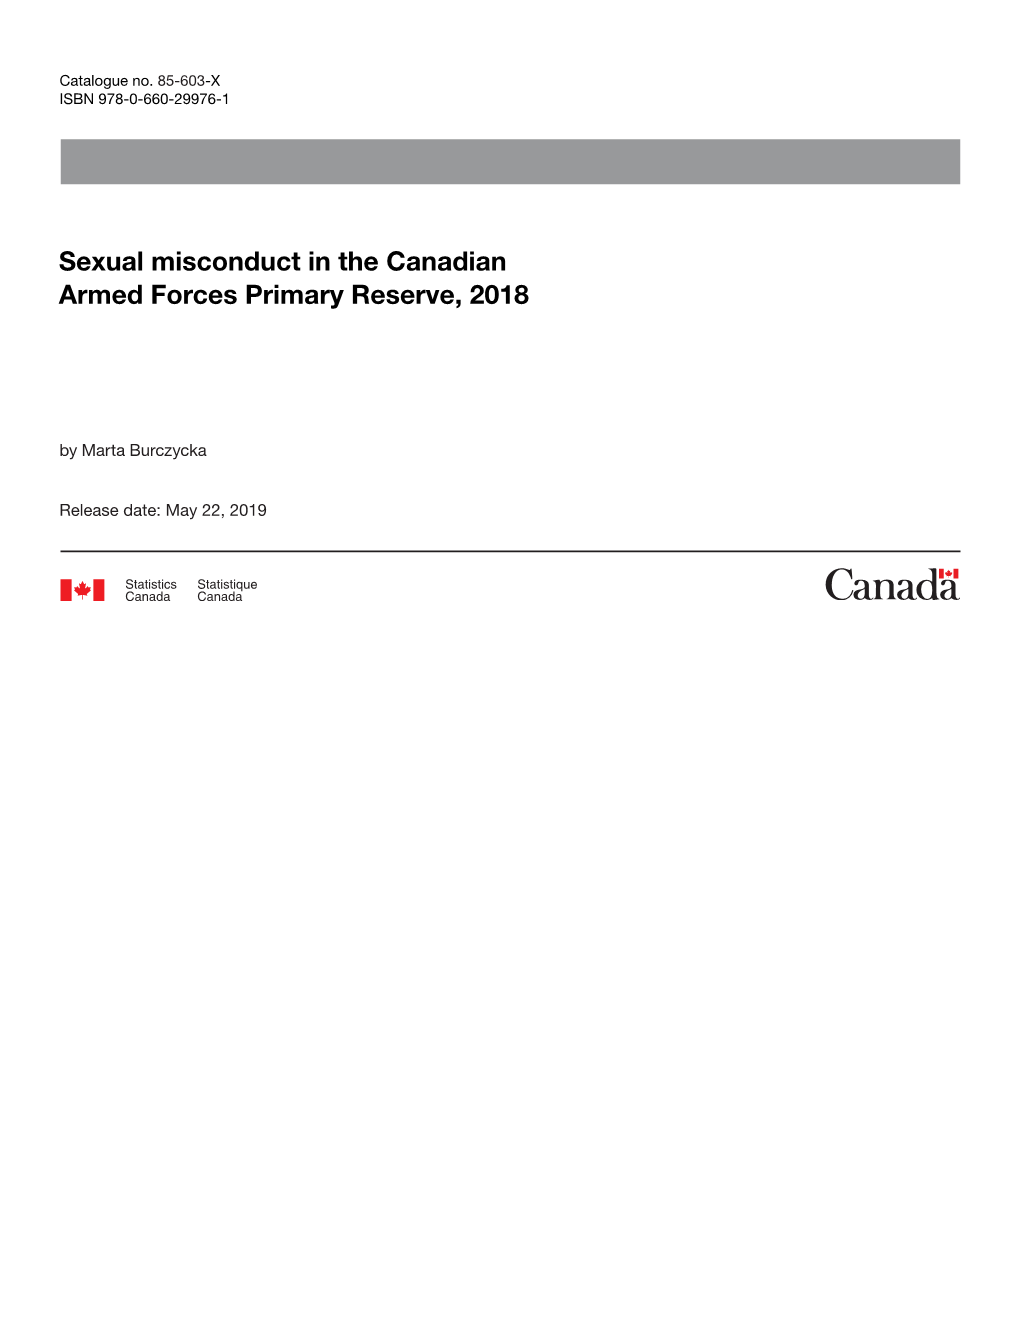 Sexual Misconduct in the Canadian Armed Forces Primary Reserve, 2018